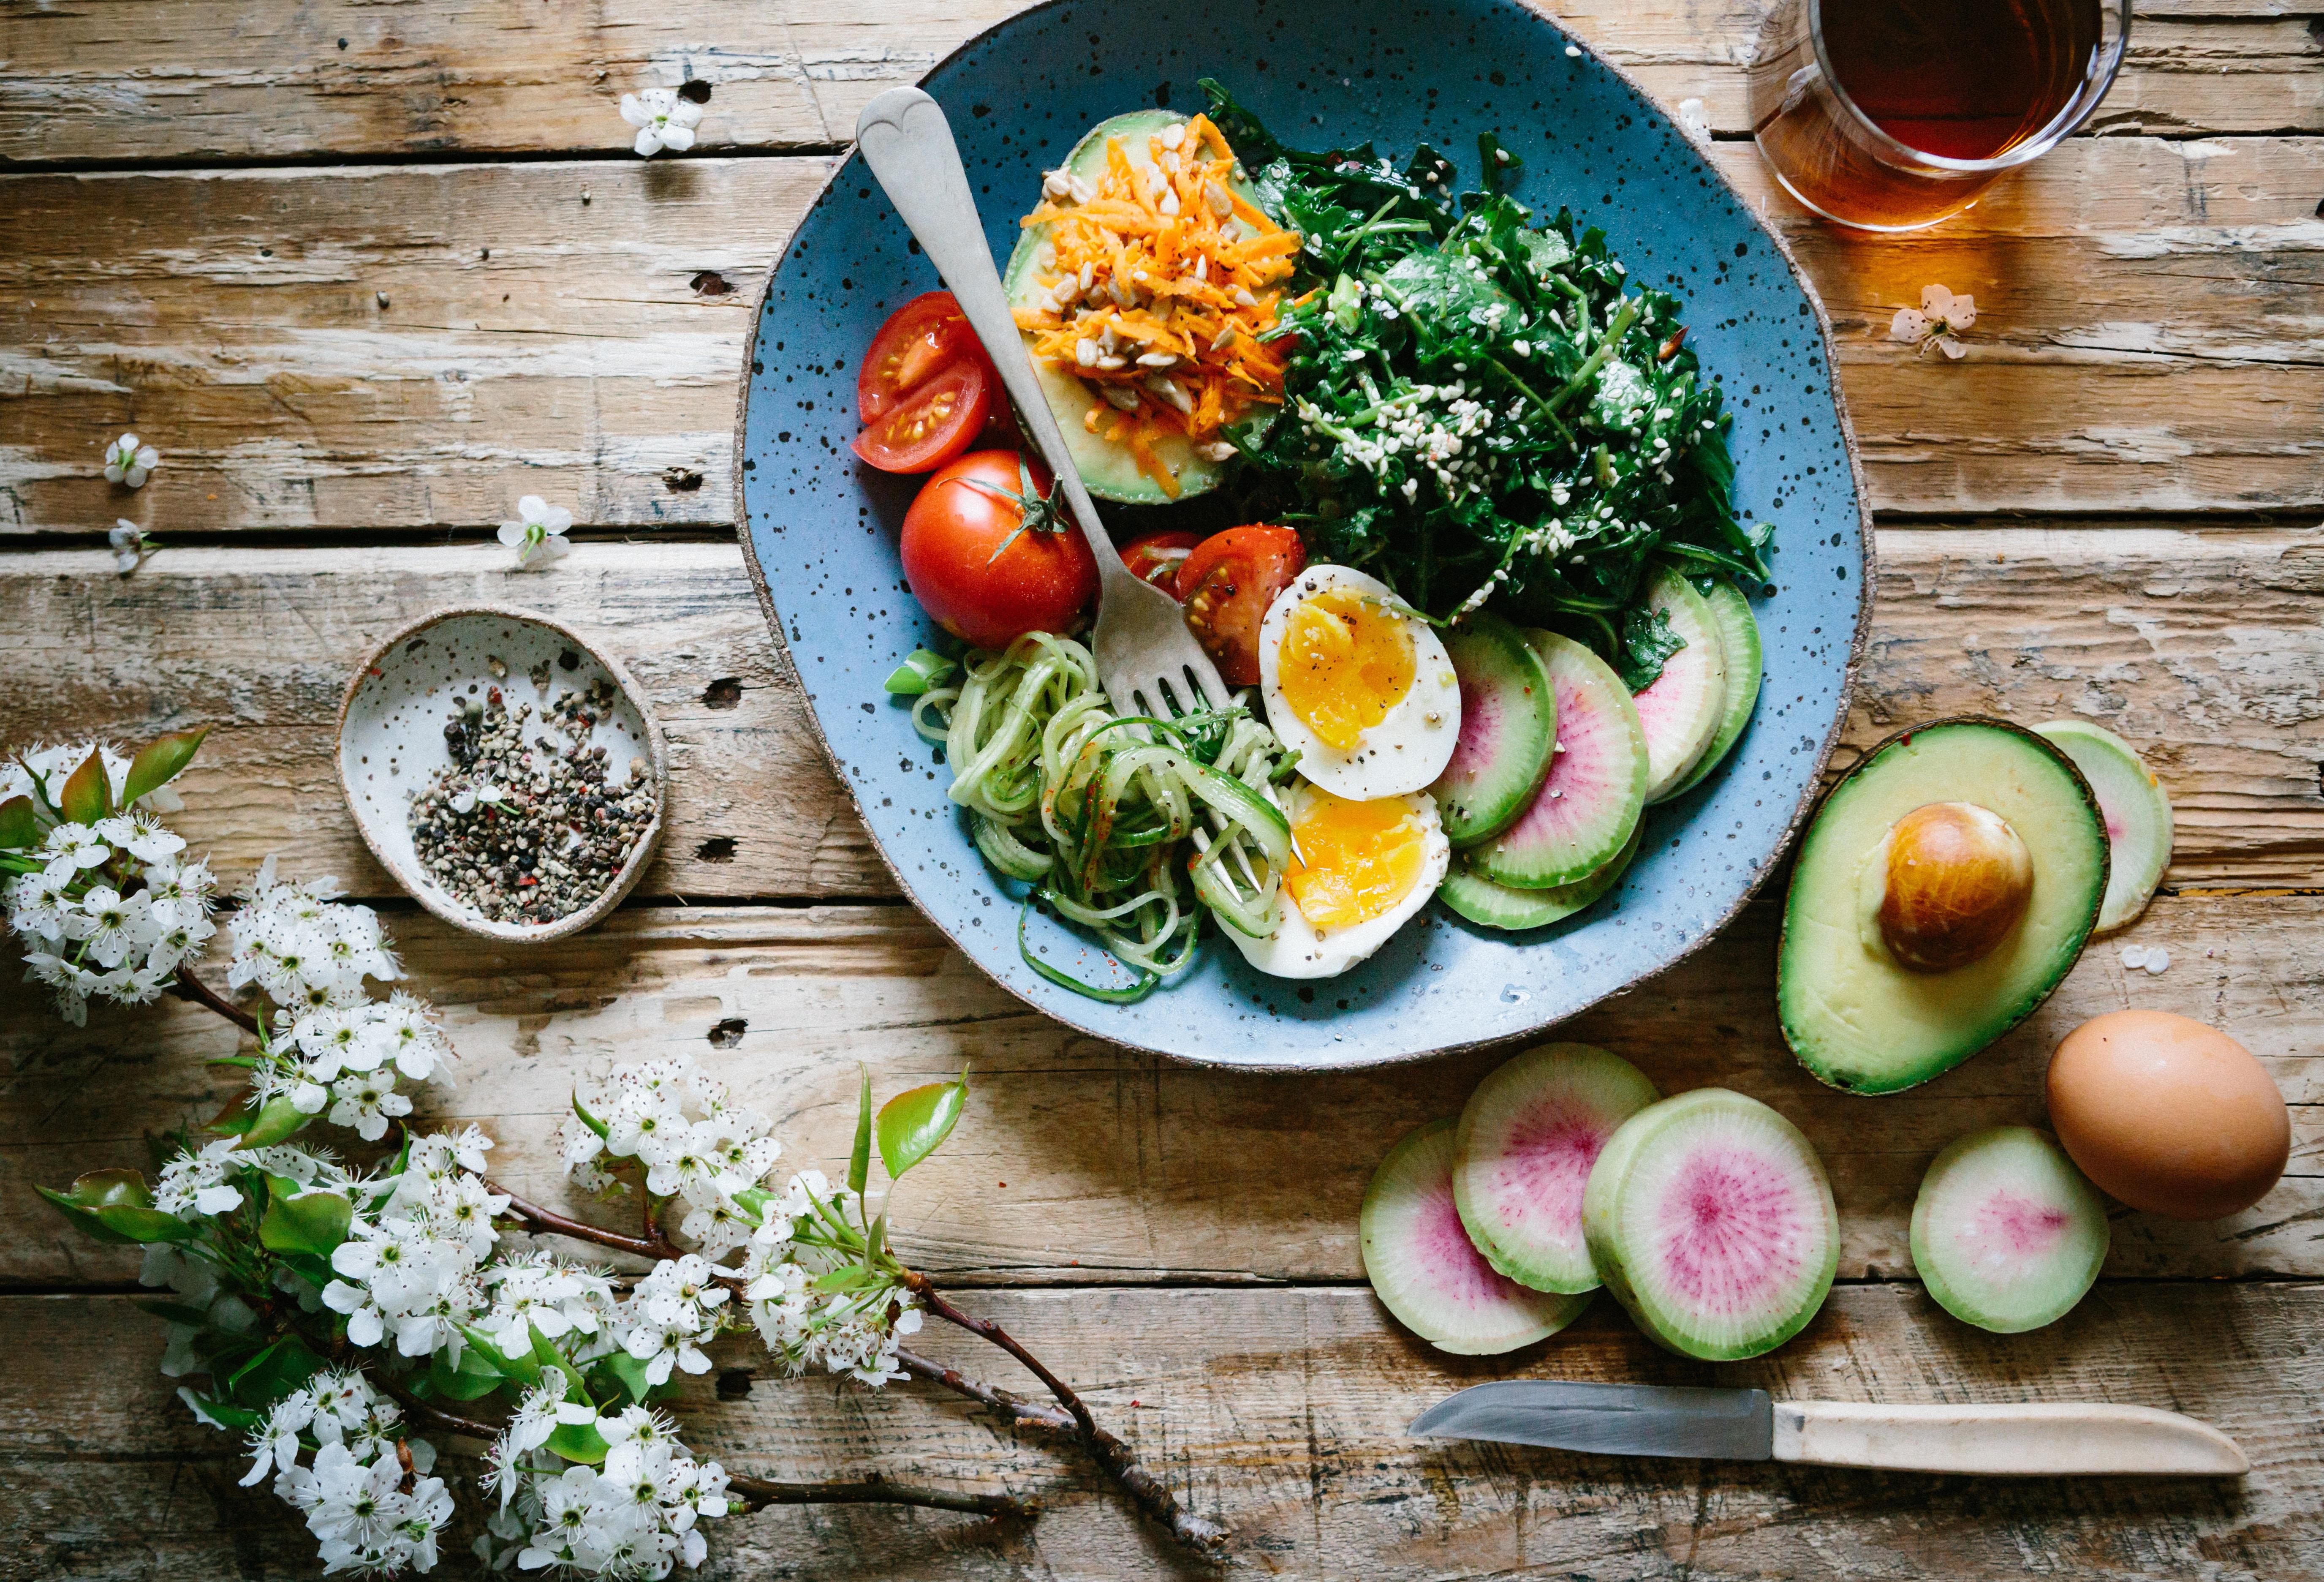 Mindful Eating and Nourishment